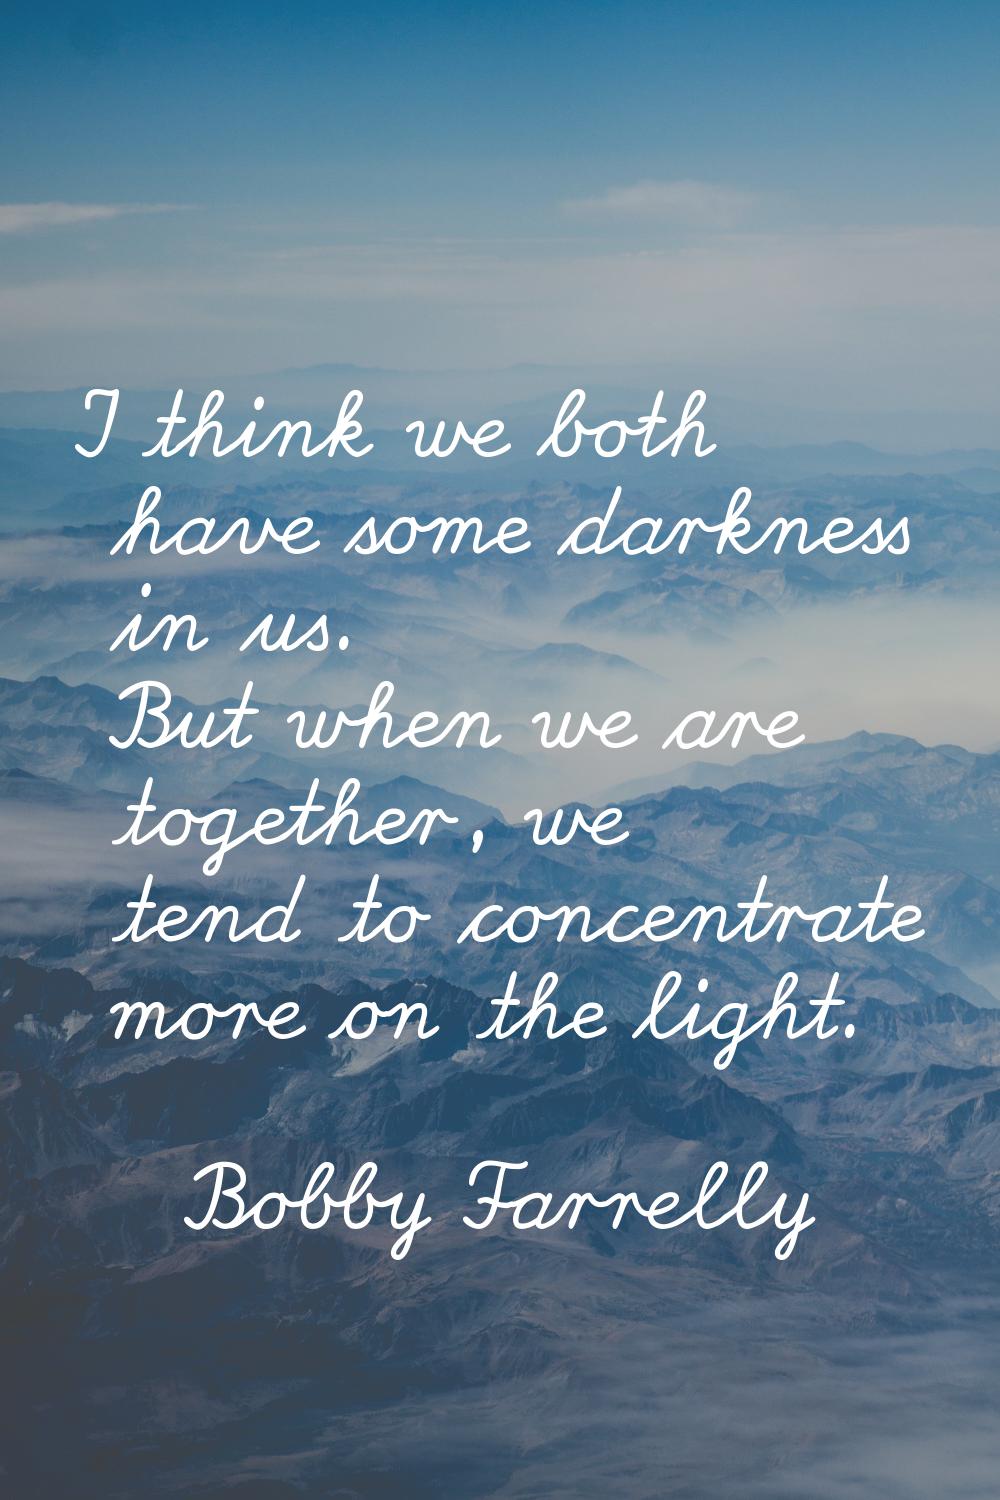 I think we both have some darkness in us. But when we are together, we tend to concentrate more on 